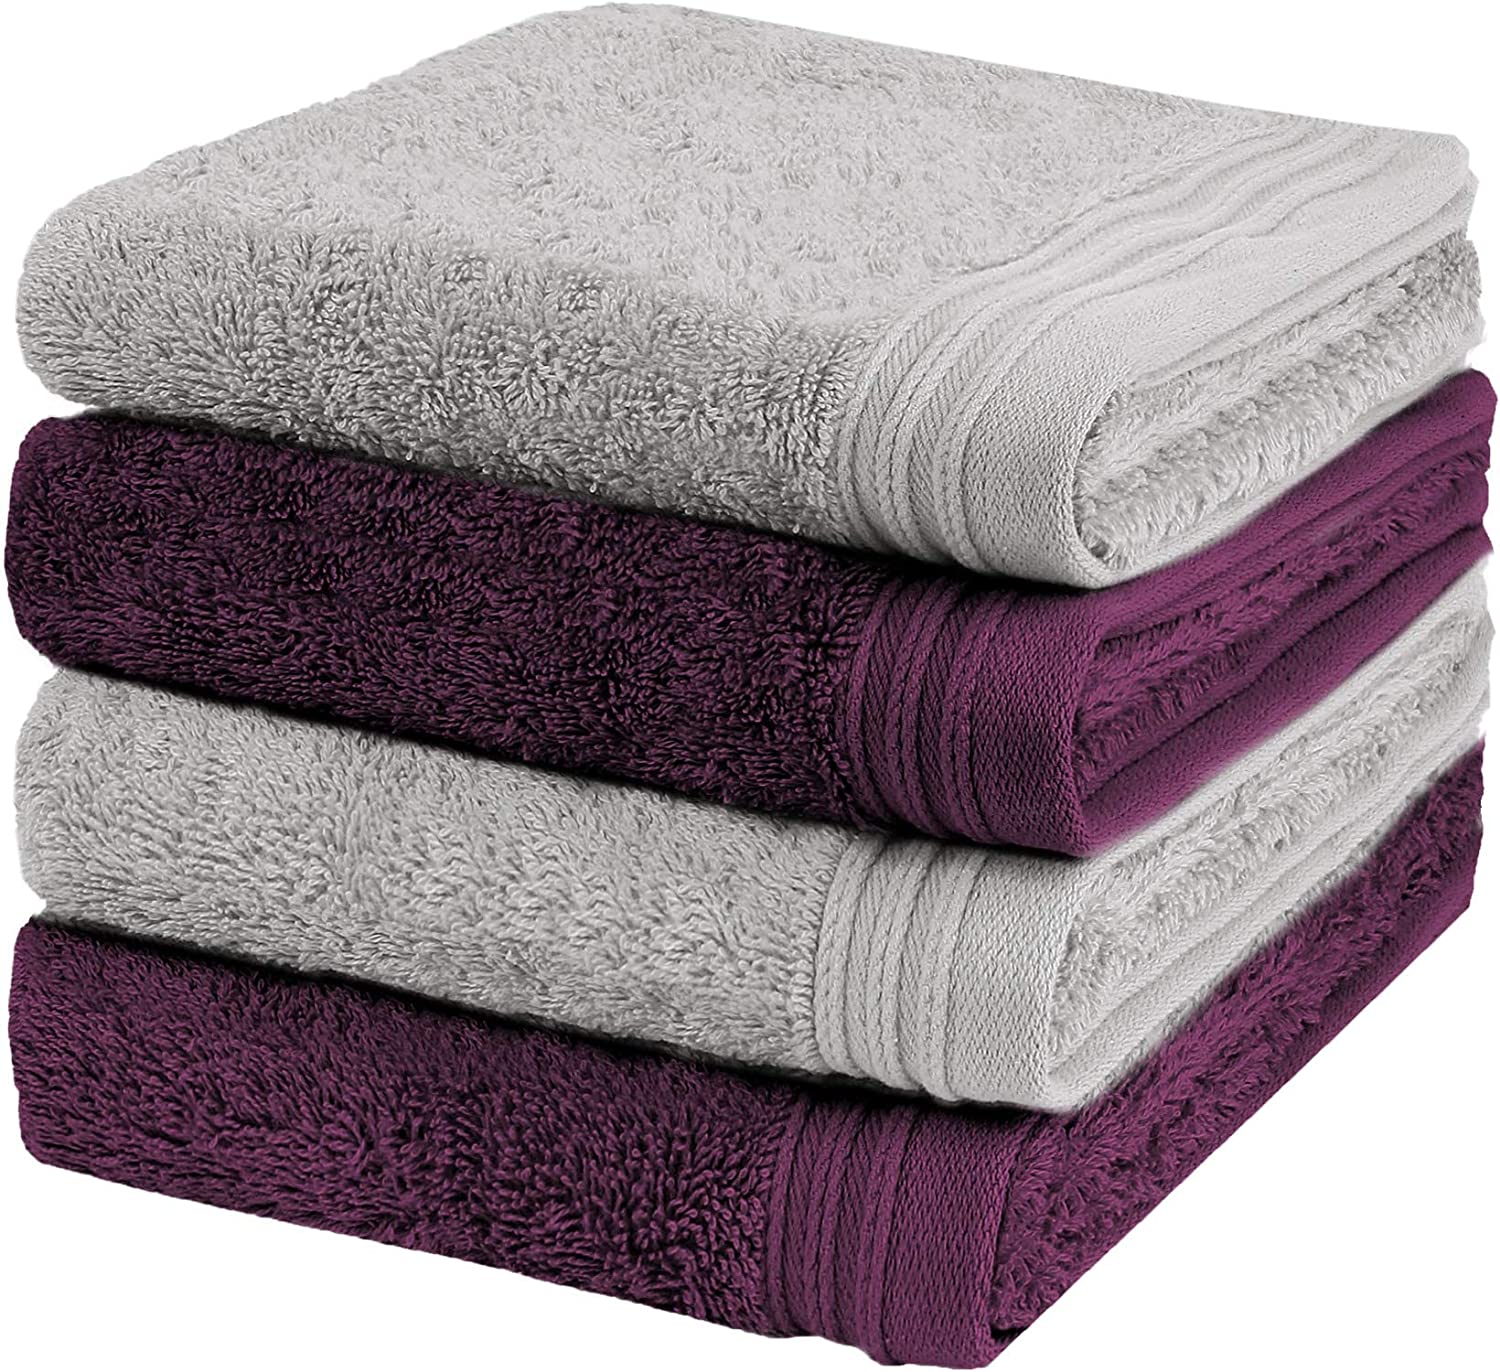 Premium Towel Set of 4 Hand Towels 18 inch x 30 inch Color: Plum and Silver | Pure Cotton |Machine Washable High Absorbency | by Weidemans, Size: 4